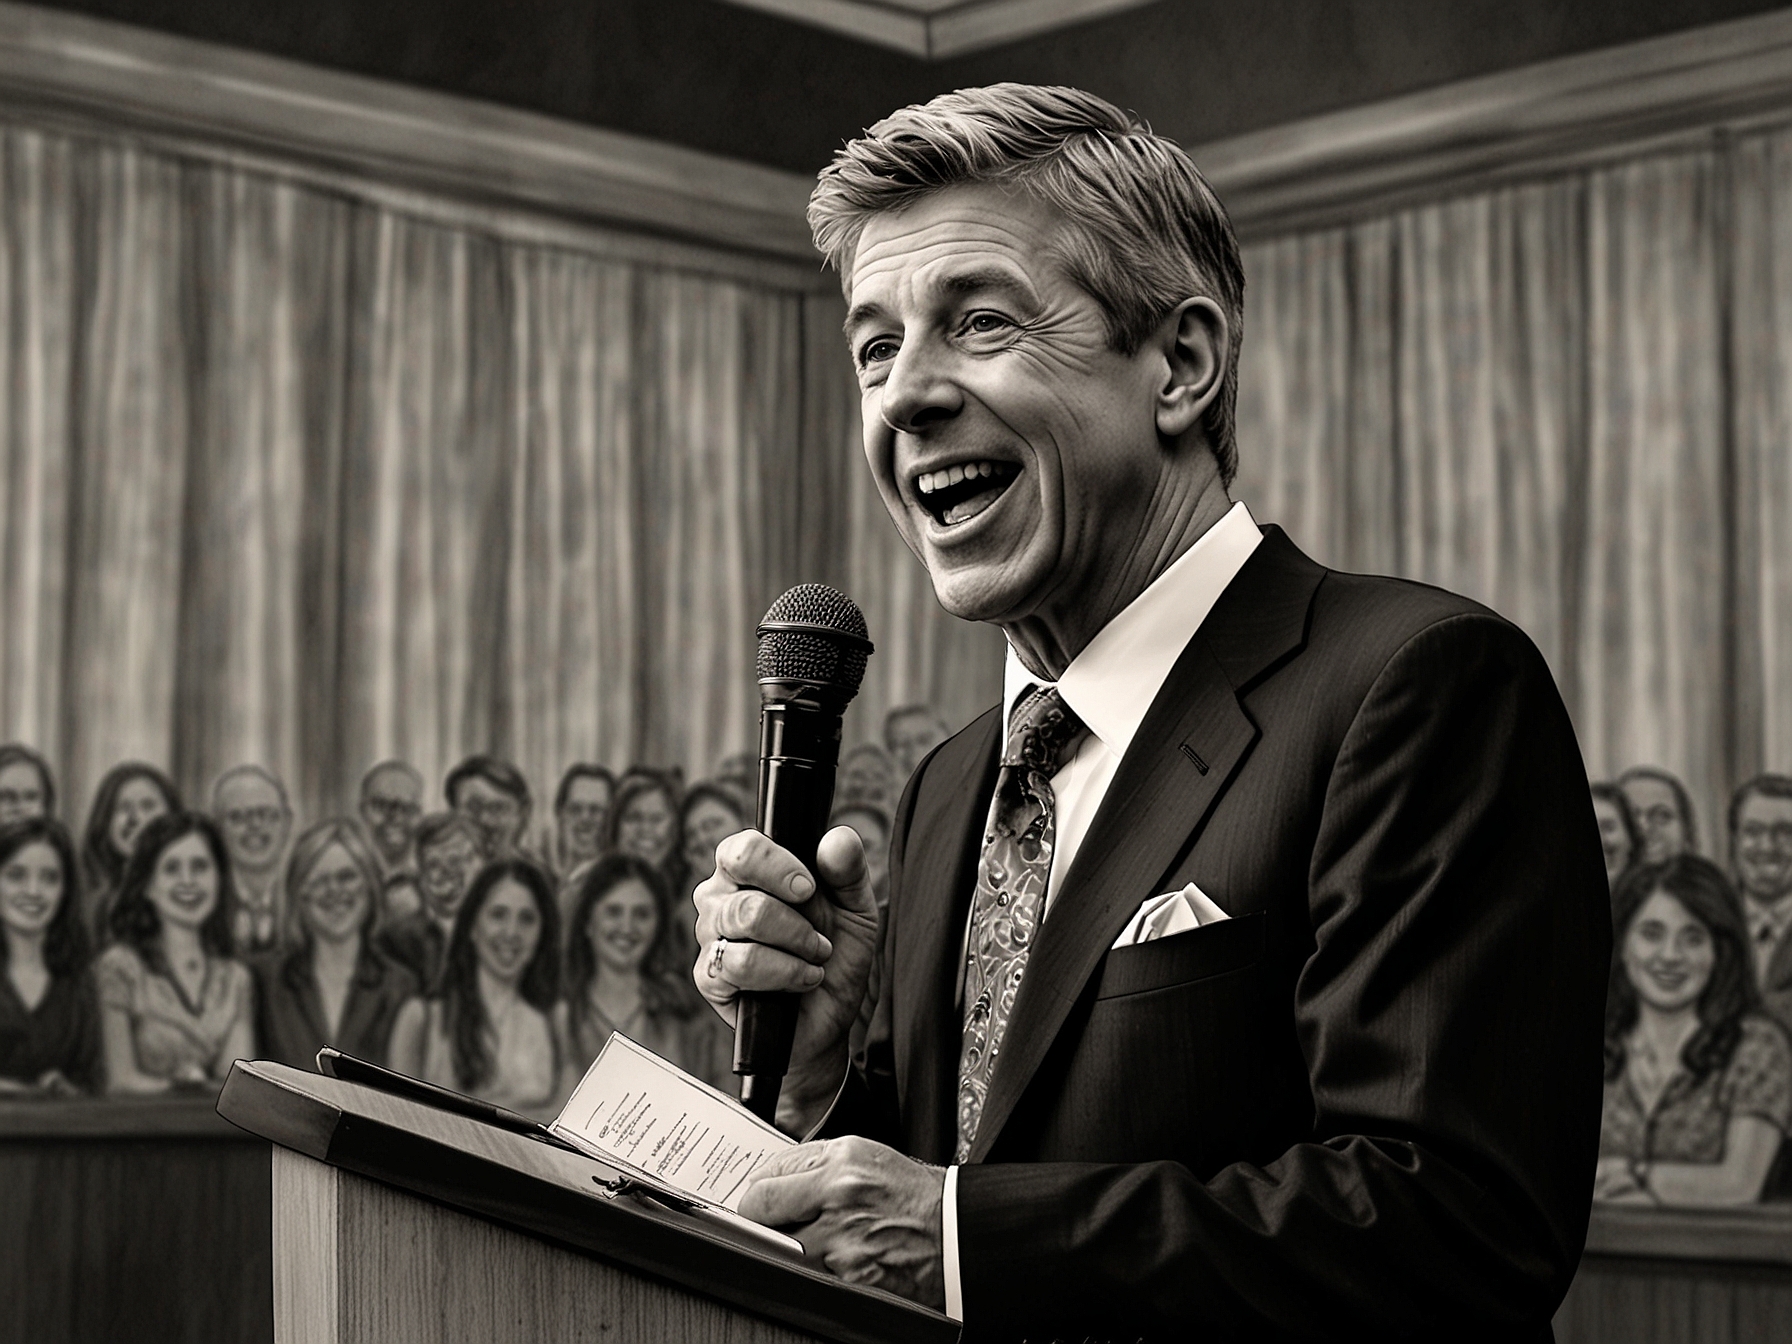 Tom Bergeron, dressed in a smart suit, speaking humorously at an event where he was honored with the Sam Rubin Award, drawing laughter from the audience.